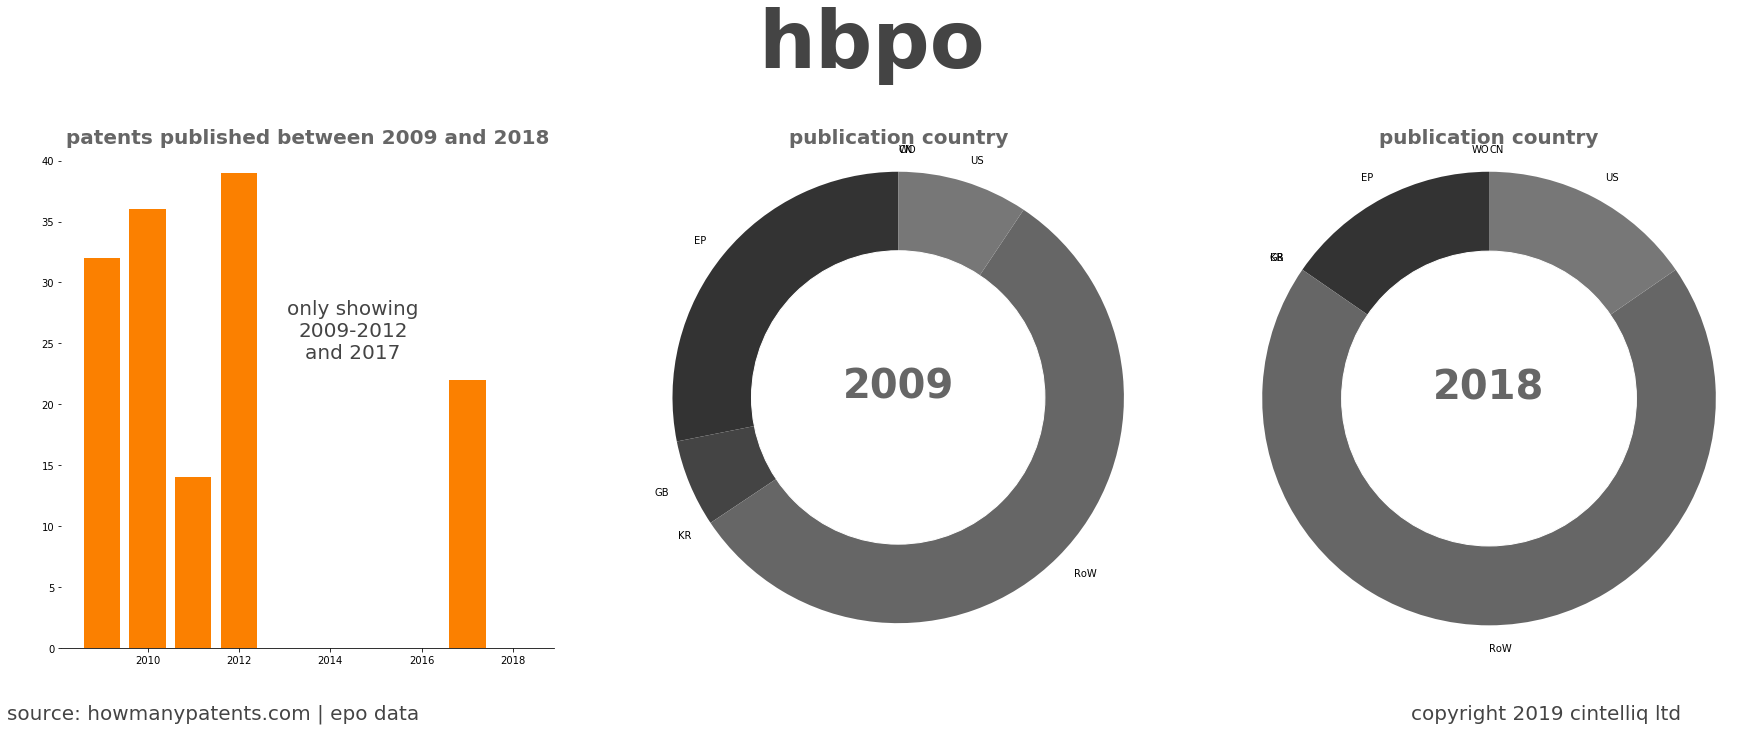 summary of patents for Hbpo